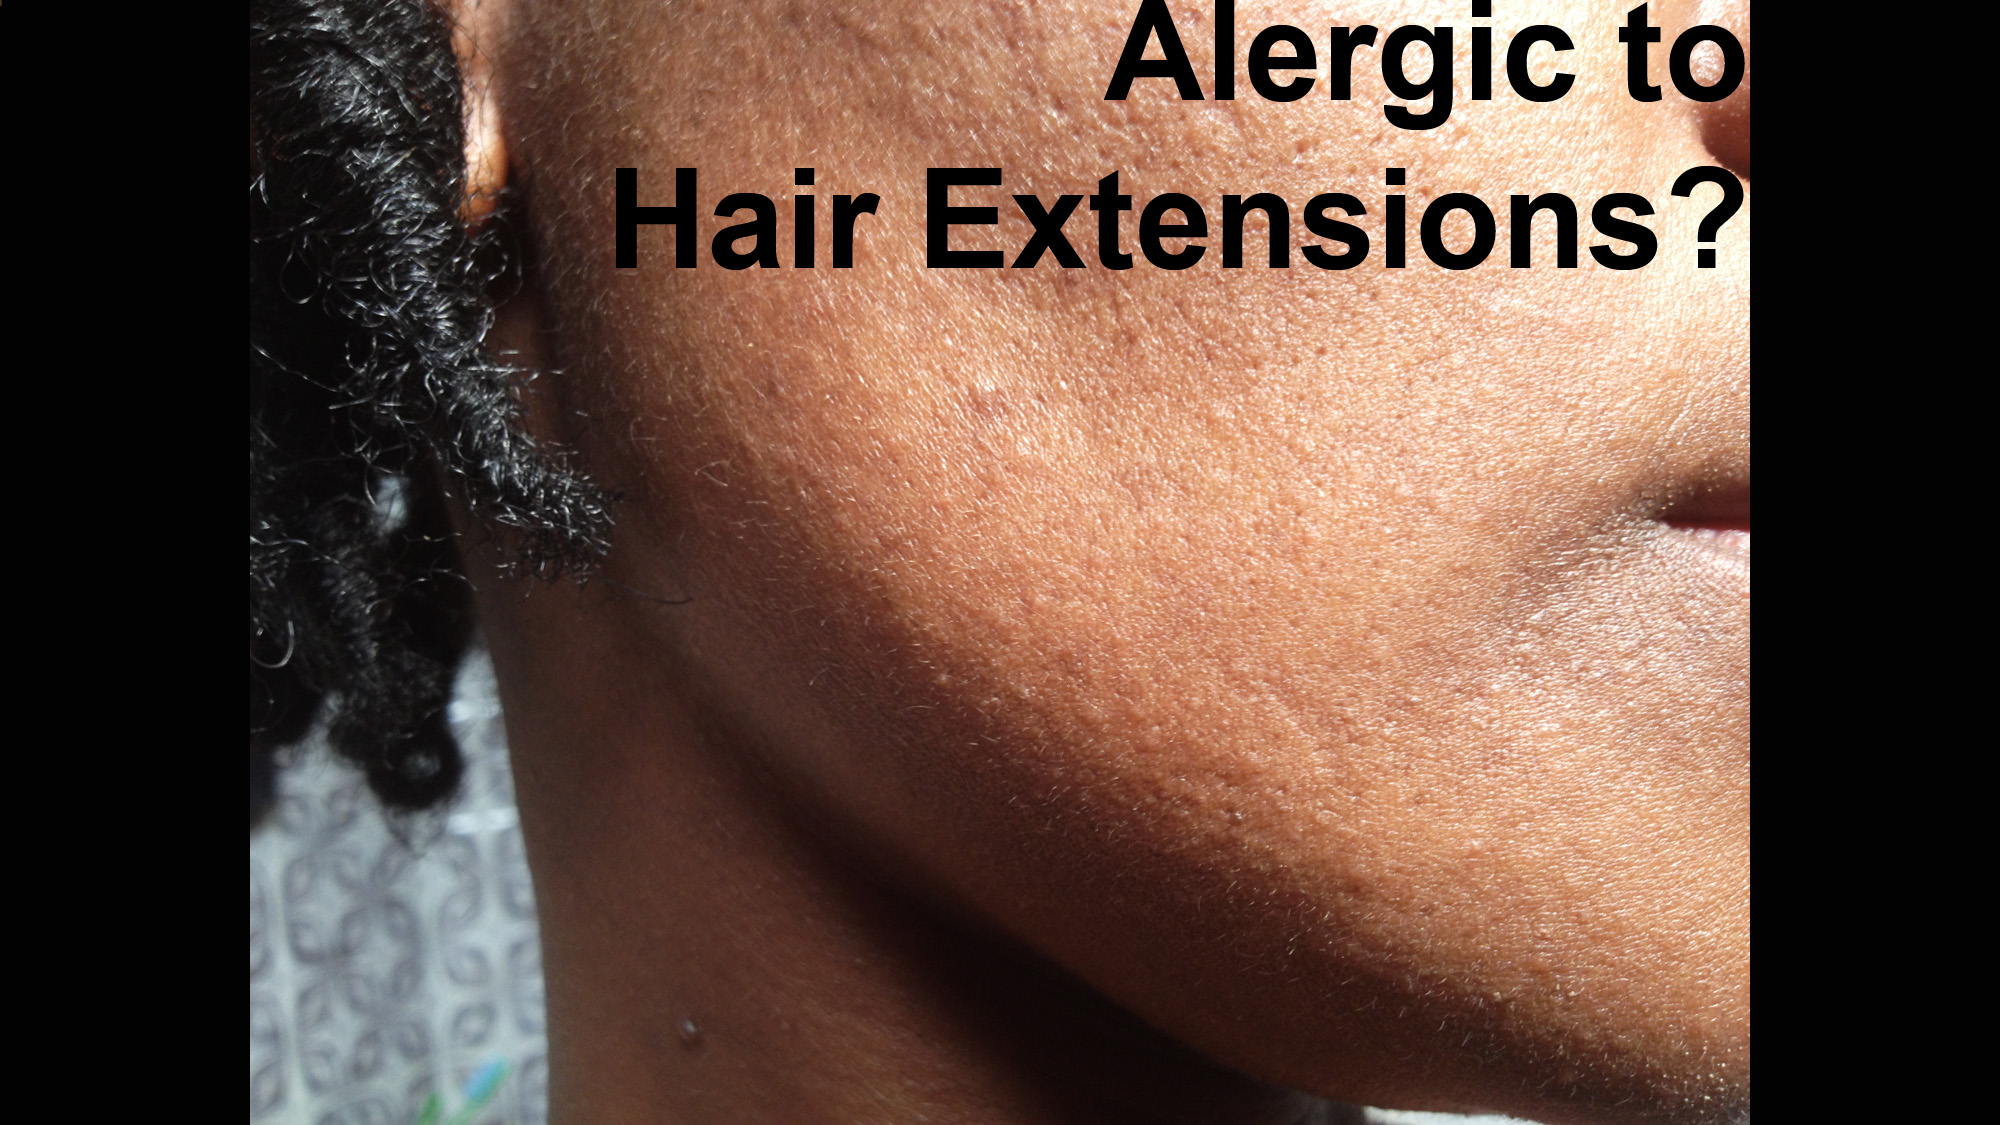 Allergy to Hair Extensions?